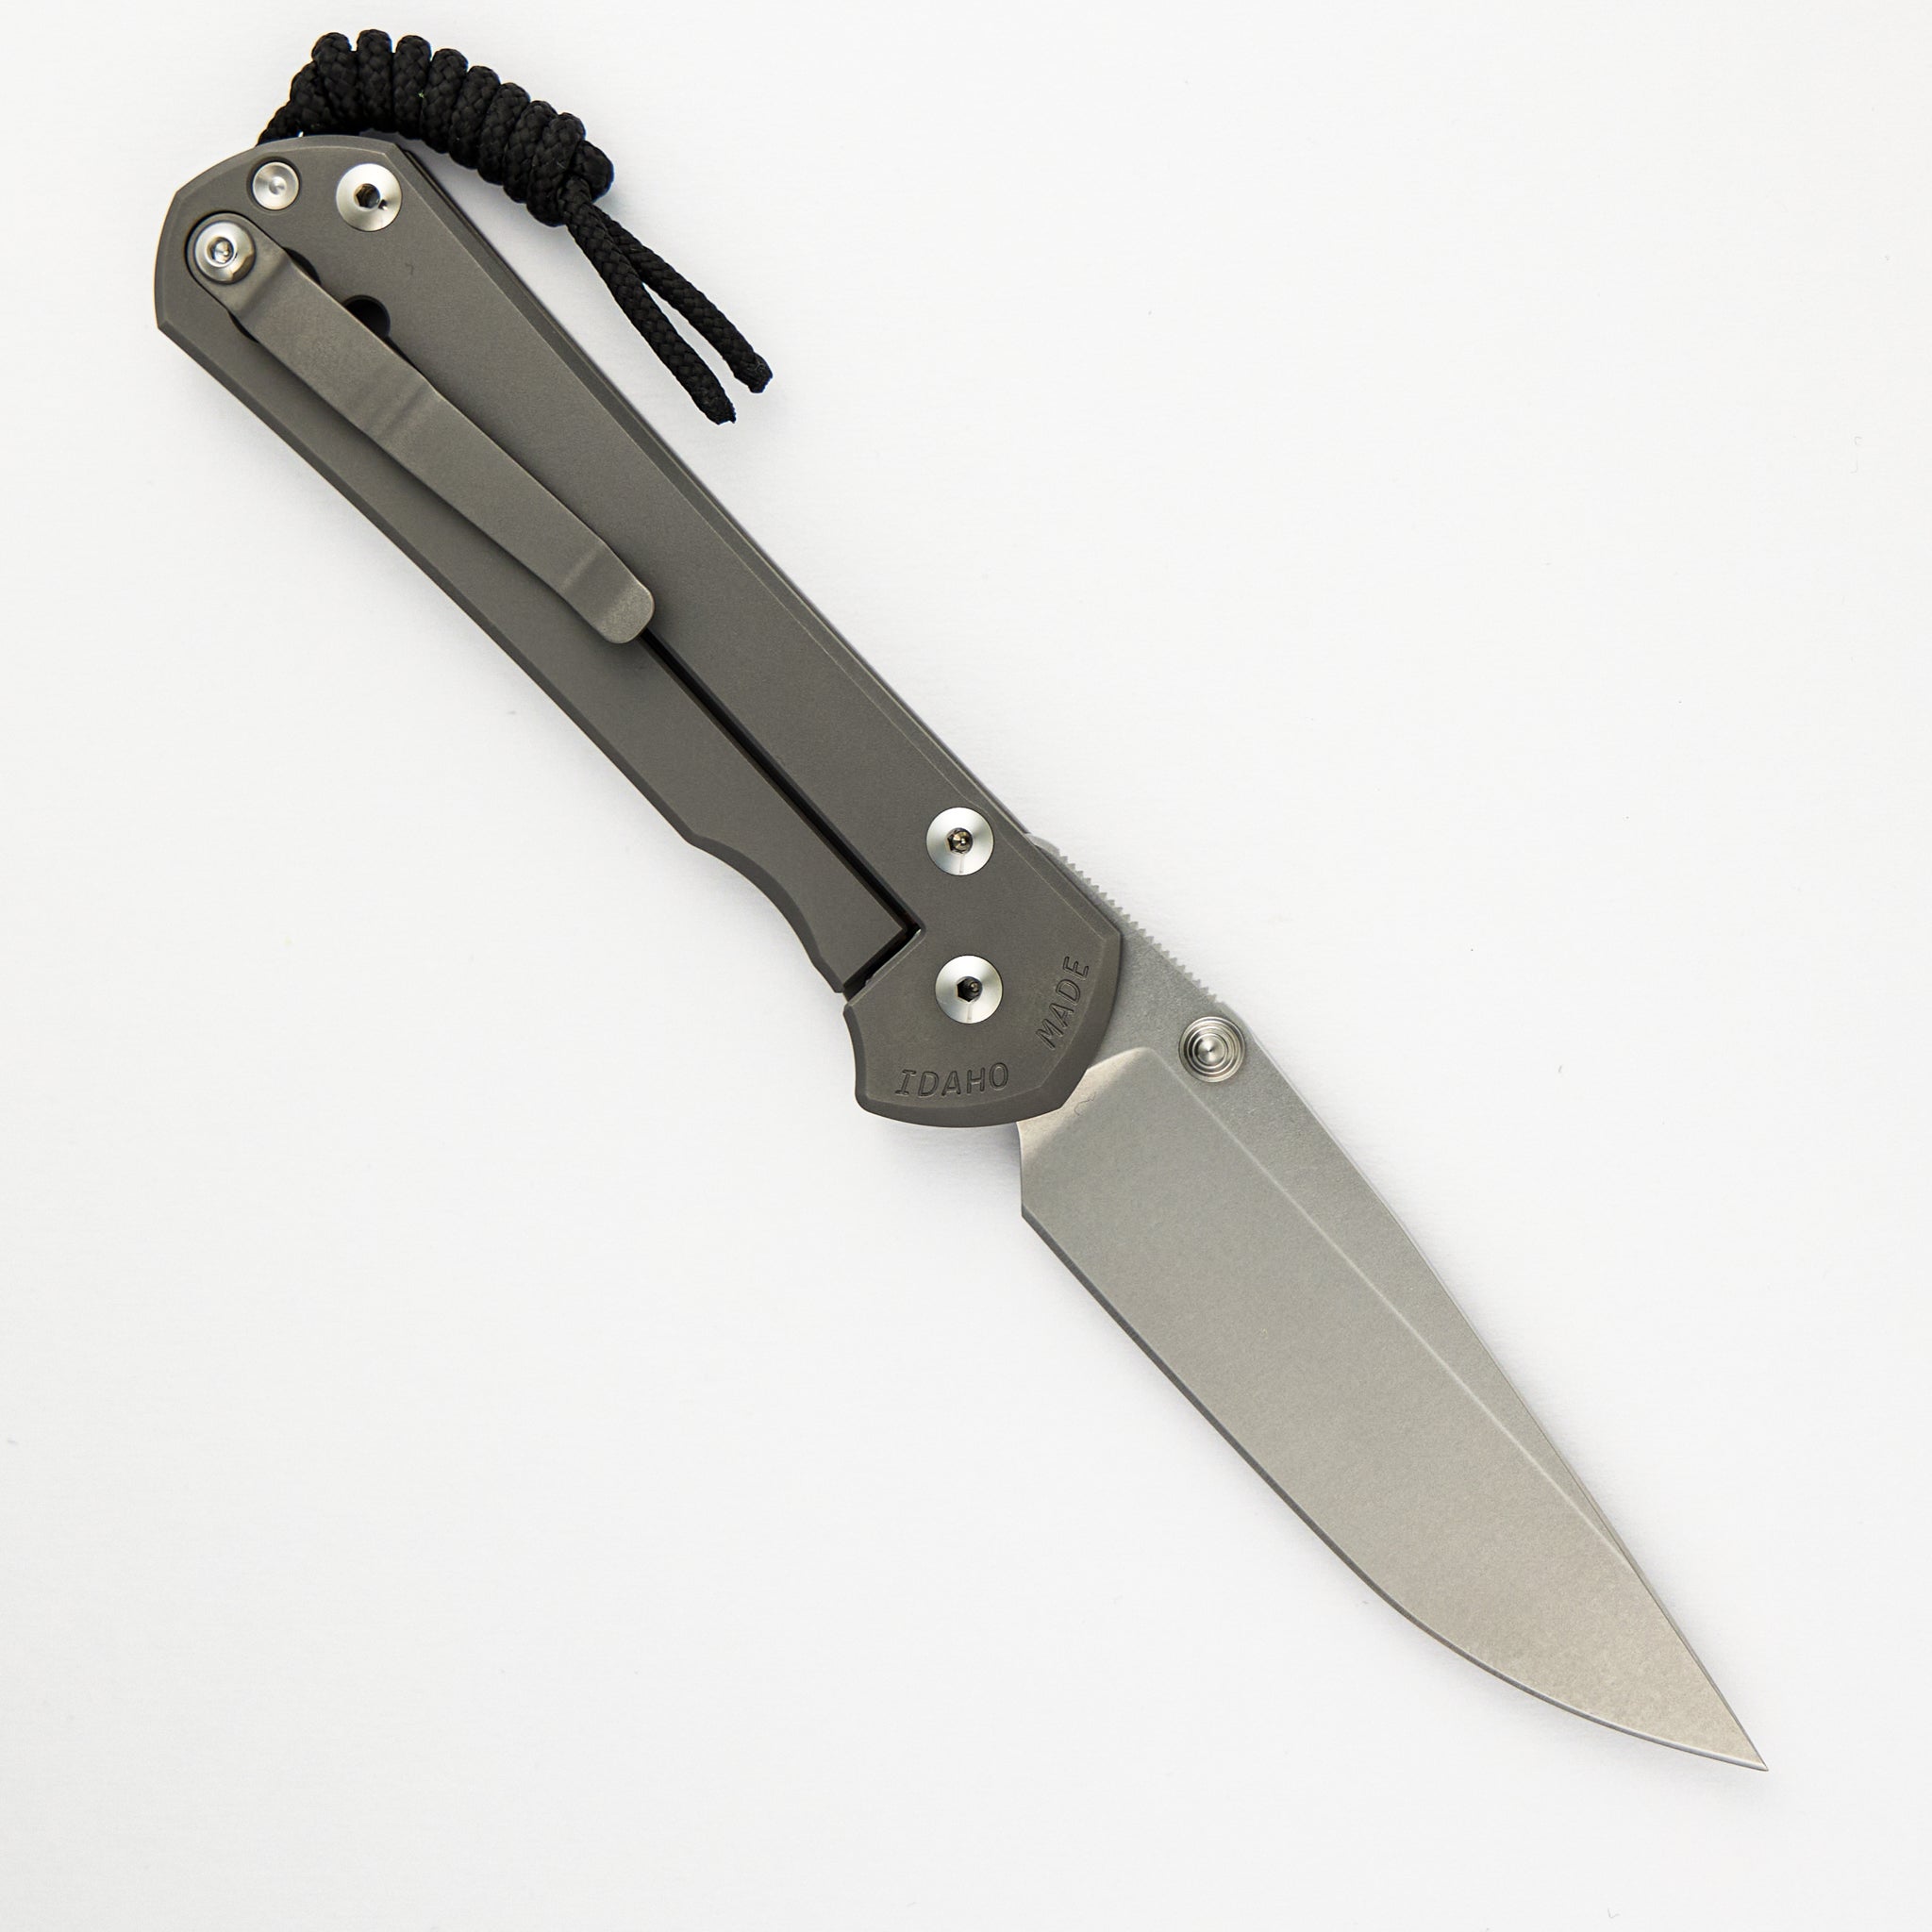 Chris Reeve Large Sebenza 31 - Glass Blasted - Drop Point CPM MagnaCut Blade - Silver Double Thumb Lugs